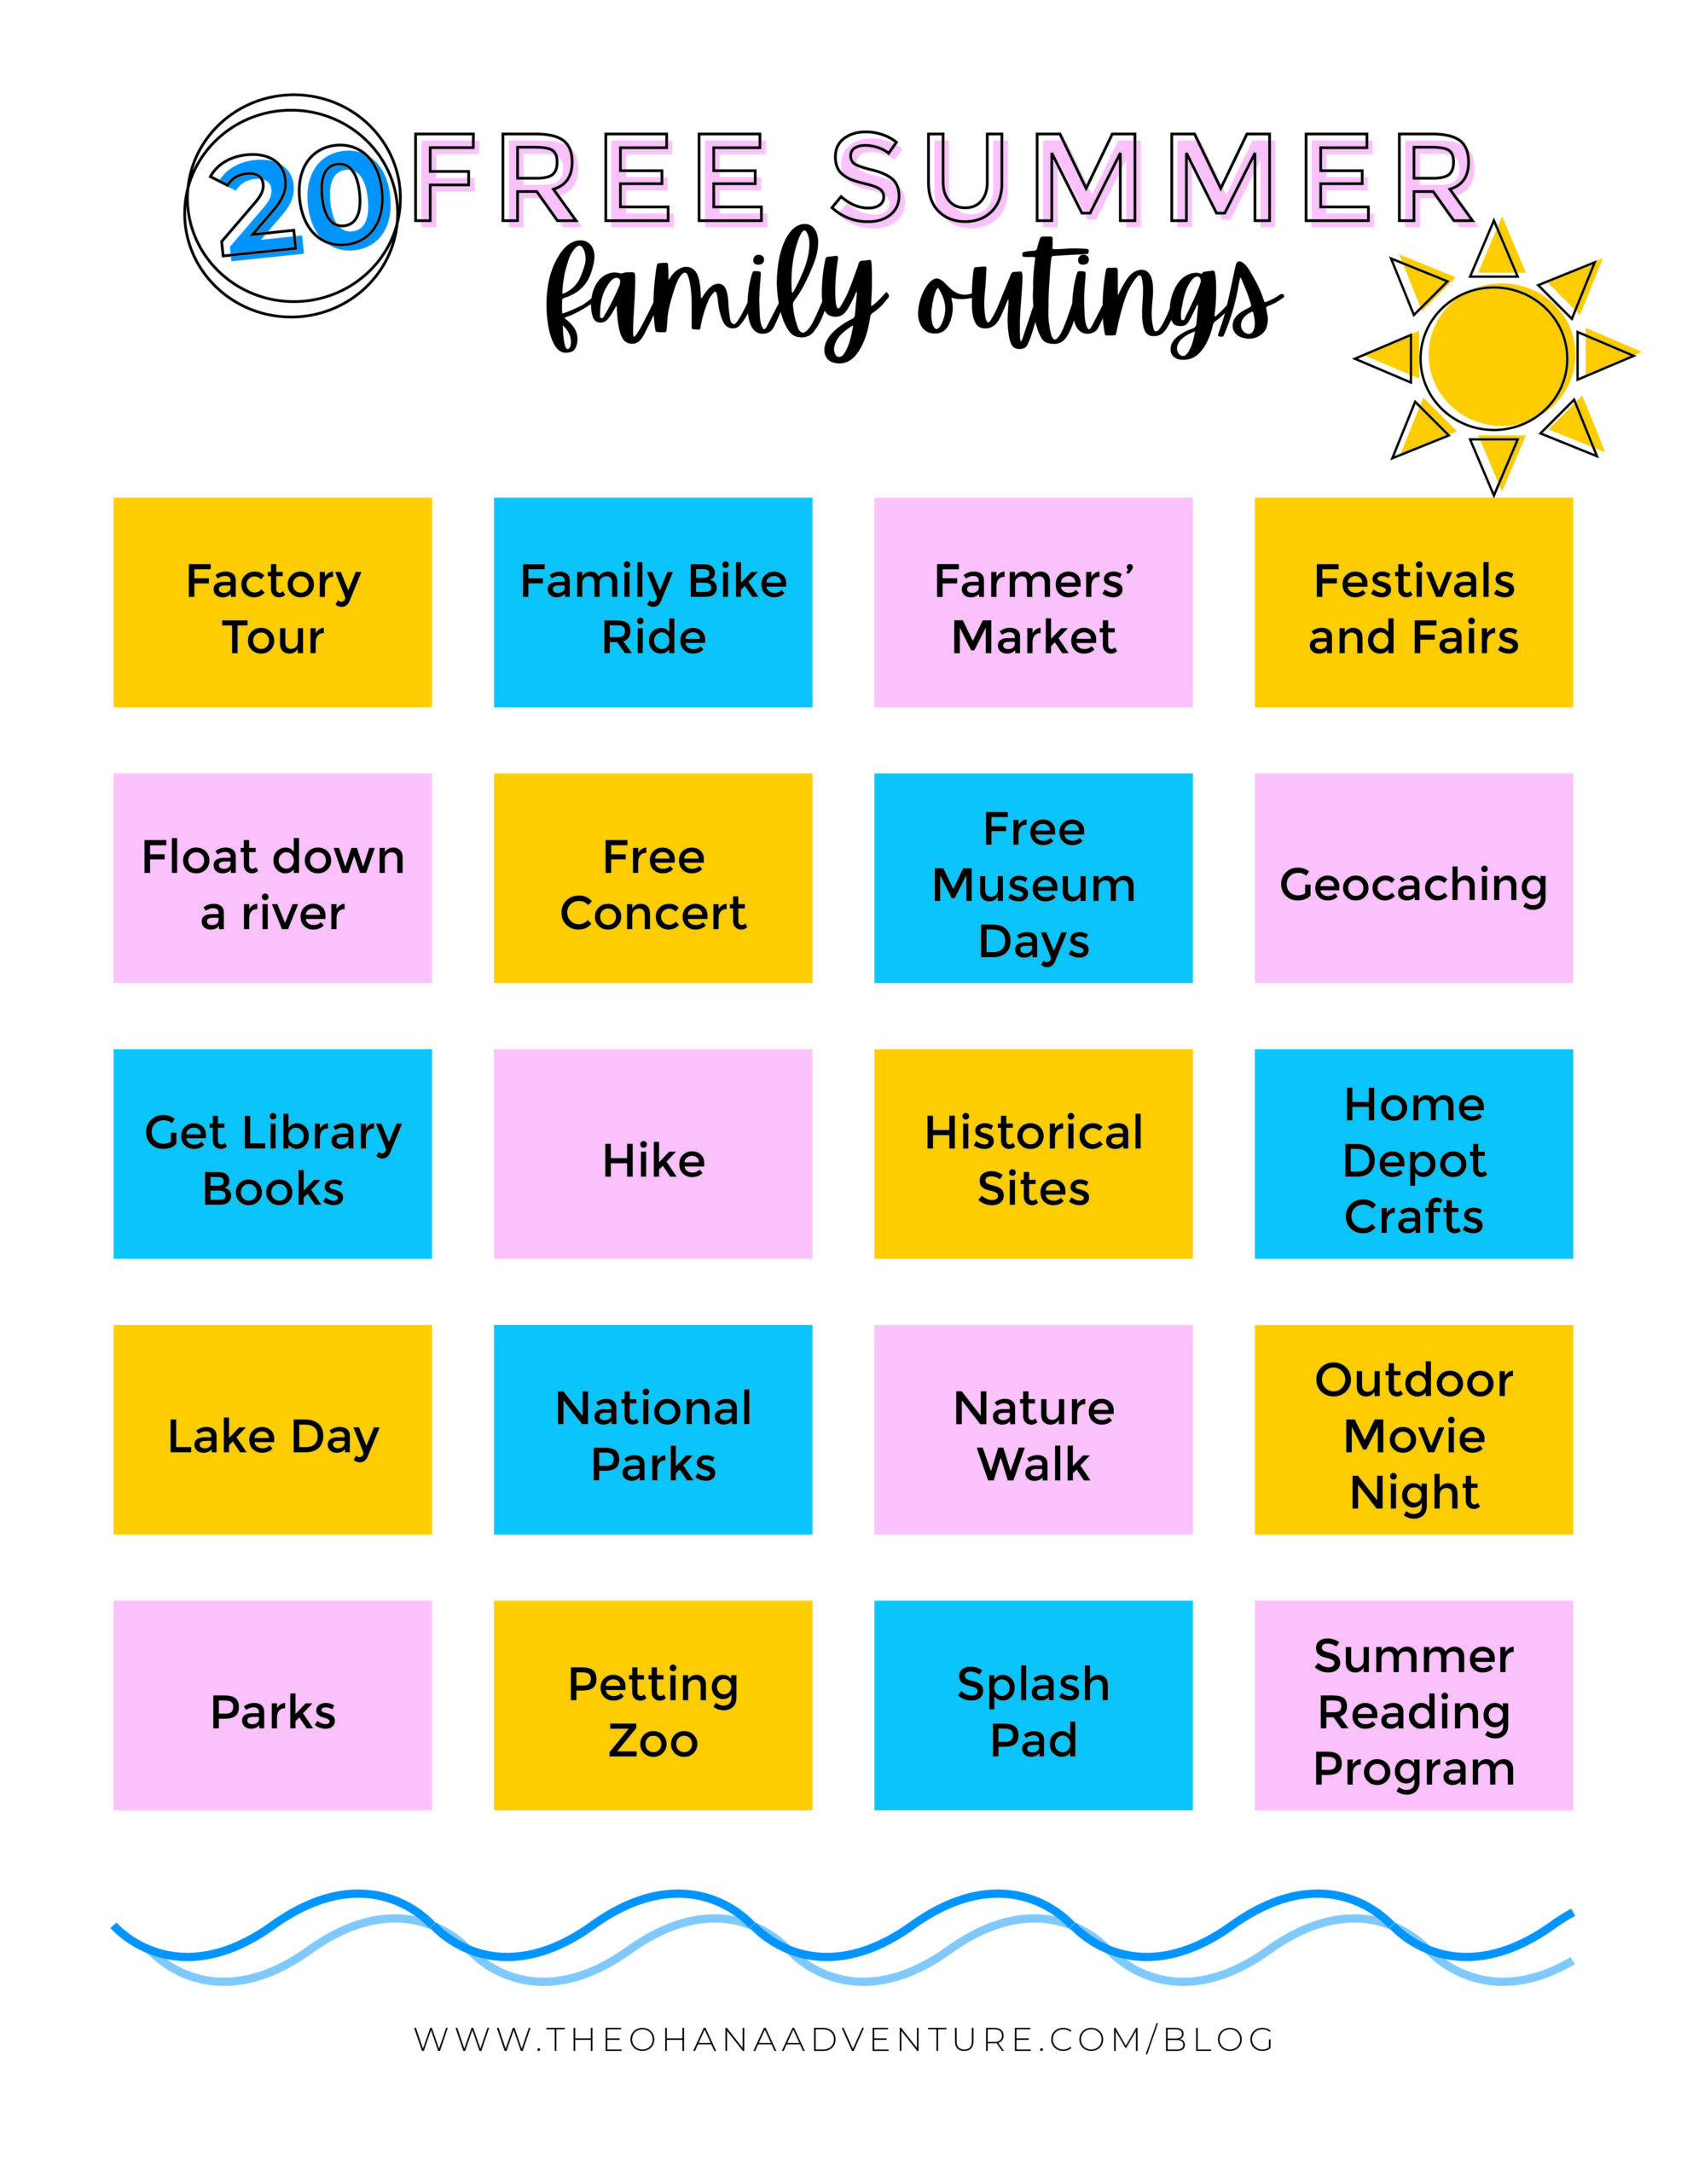 20 free summer family outings